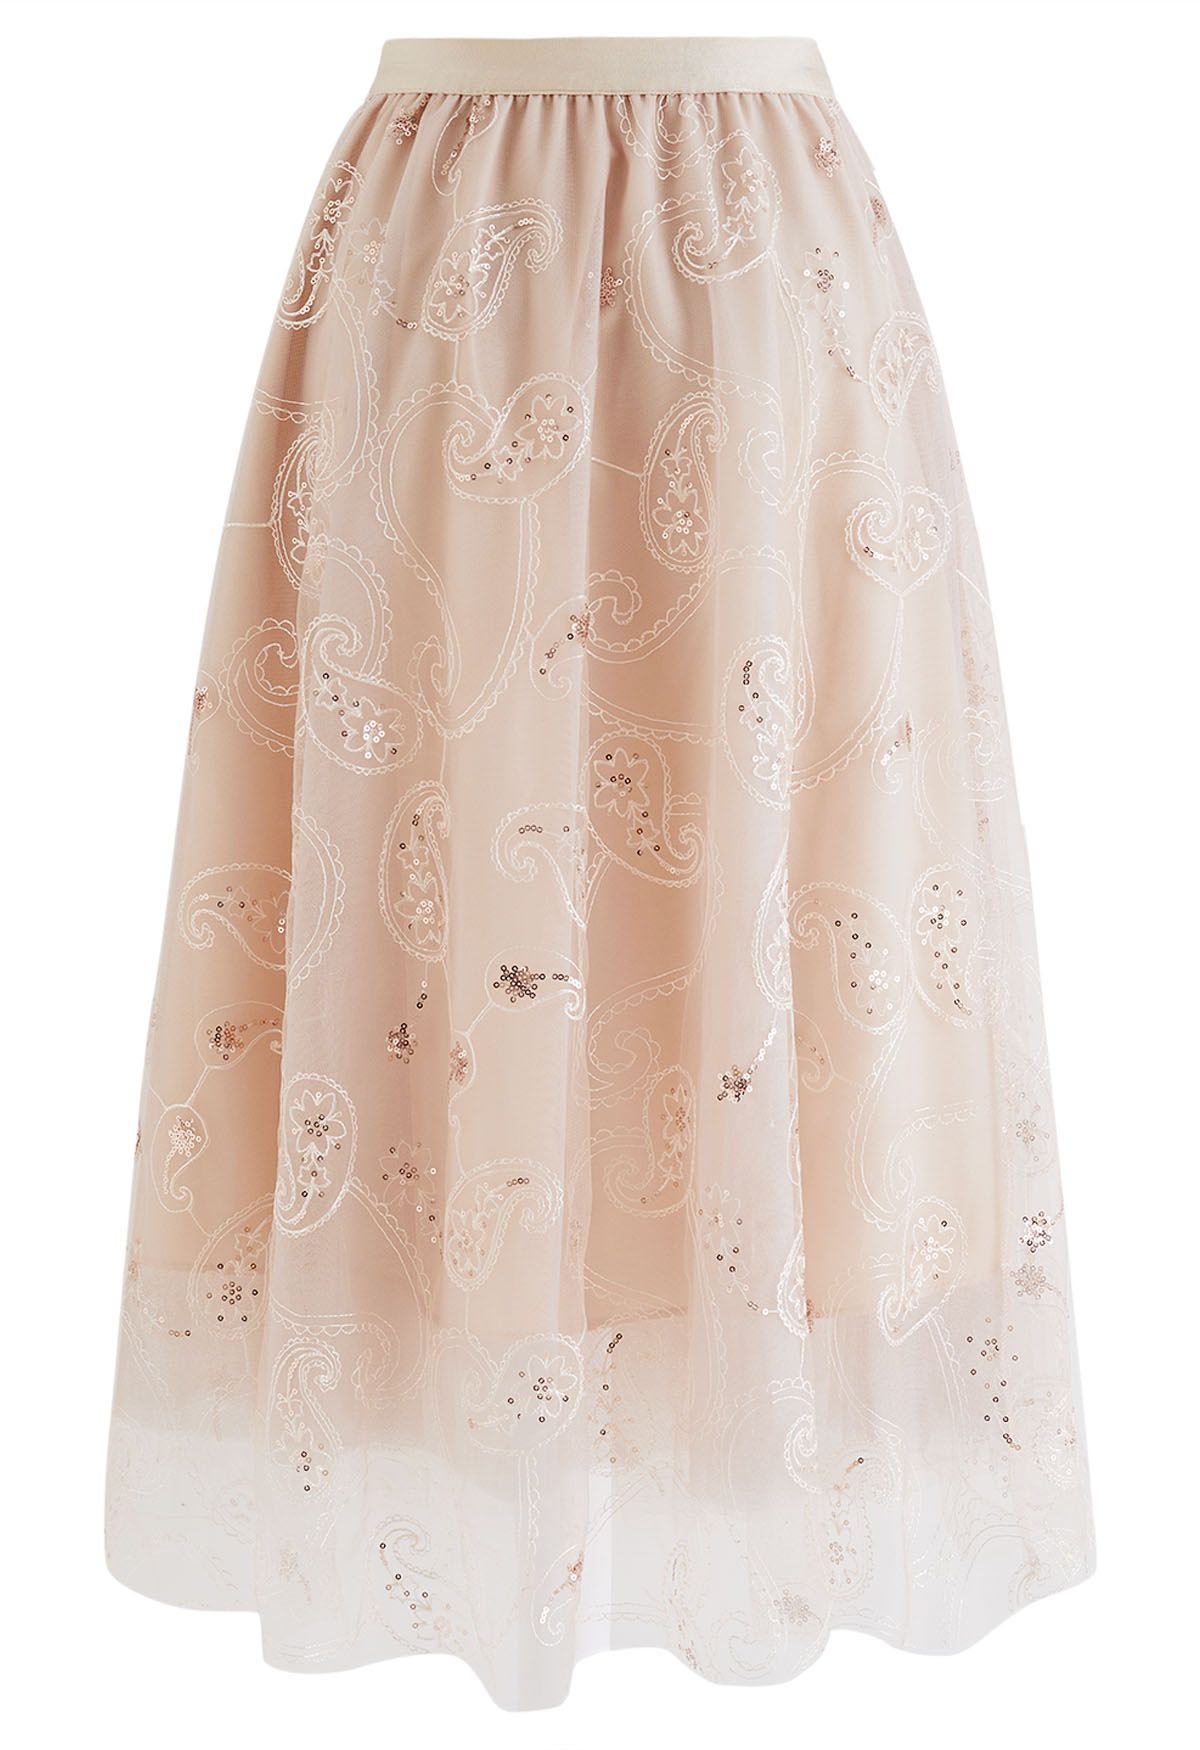 Sequined Embroidered Paisley Mesh Midi Skirt in Apricot